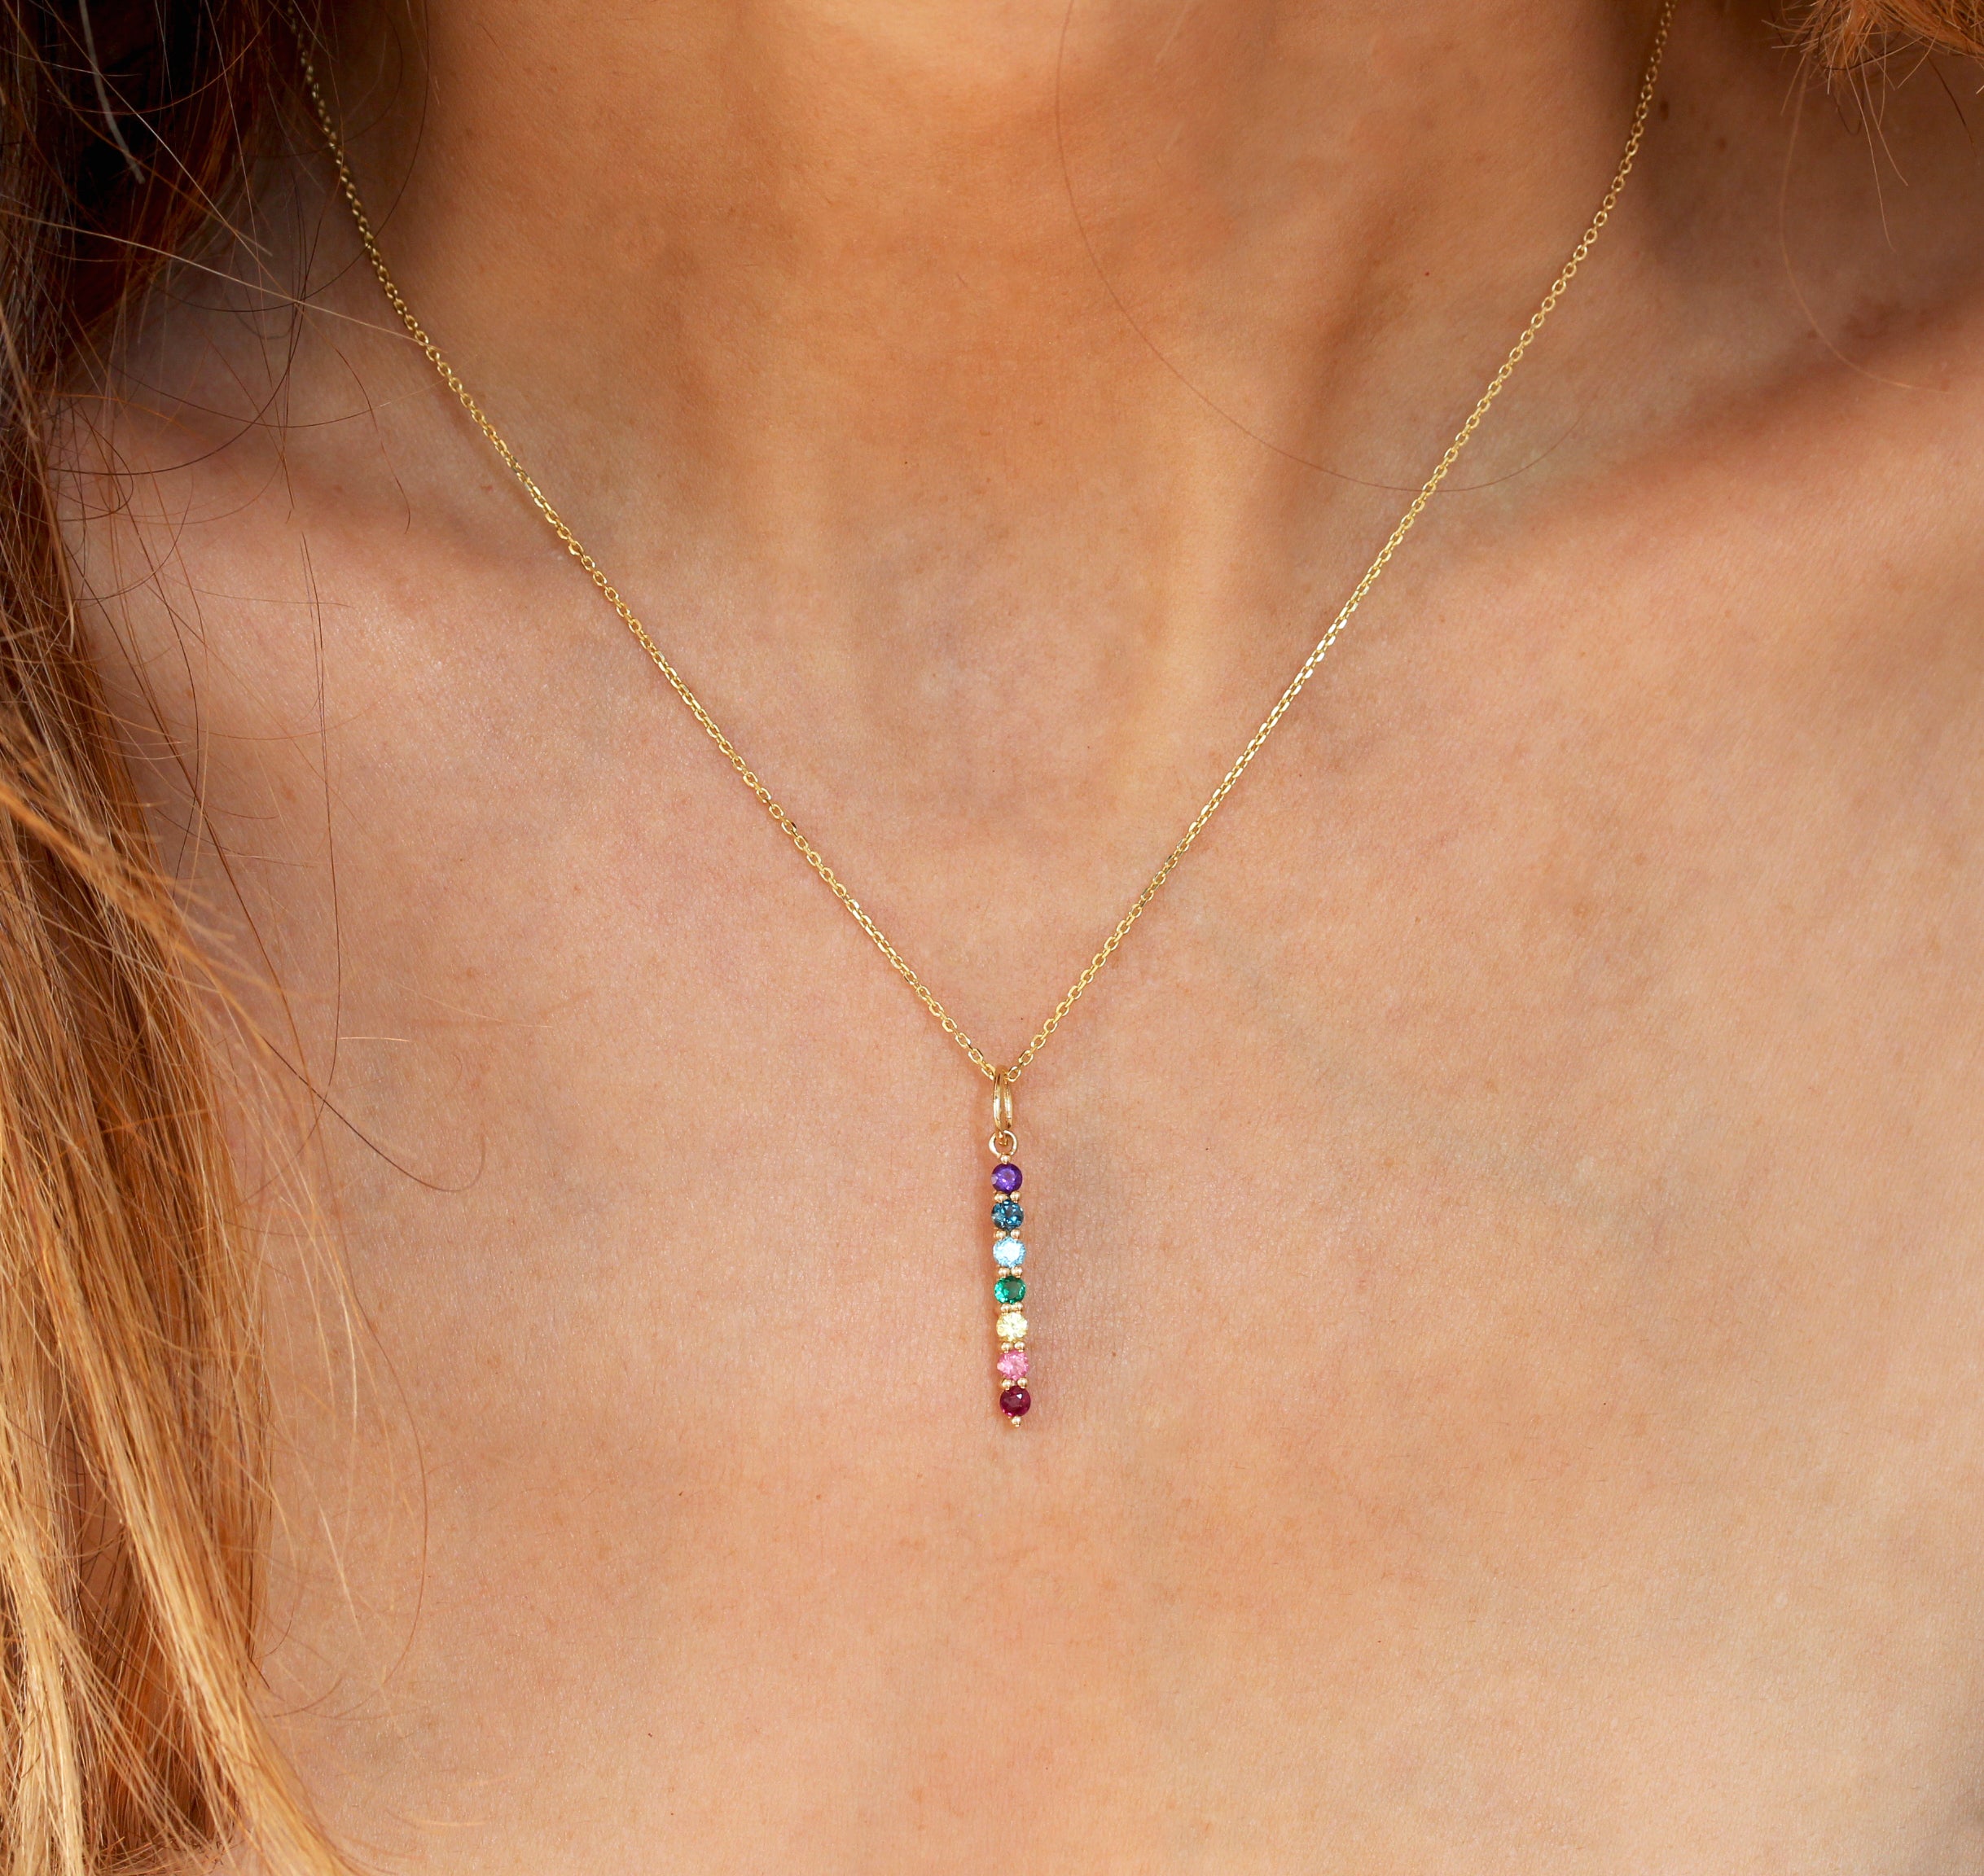 The Light from Within: rainbow gem mosaic necklace - Sophia Forero Designs